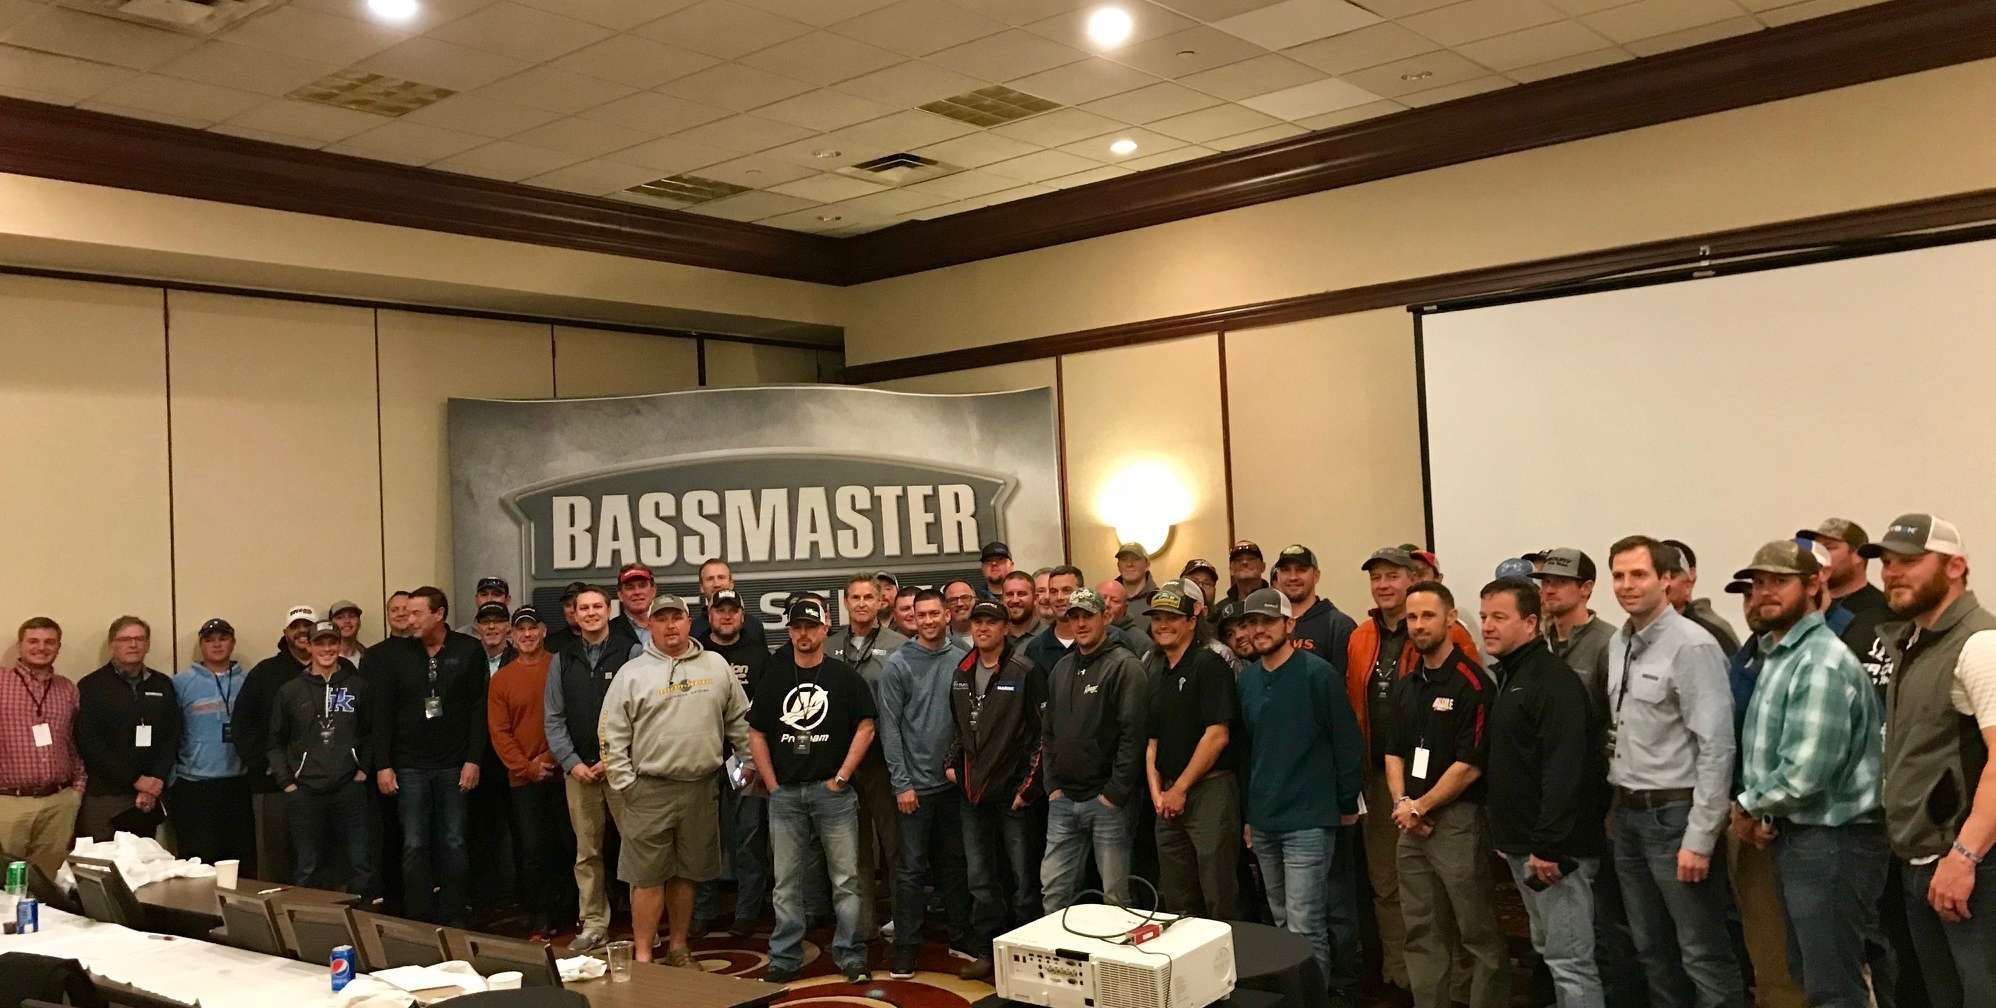 Current Bassmaster Elite Series anglers are familiar with Birmingham, Ala., after most visited the city to prep for this year's tournament series.